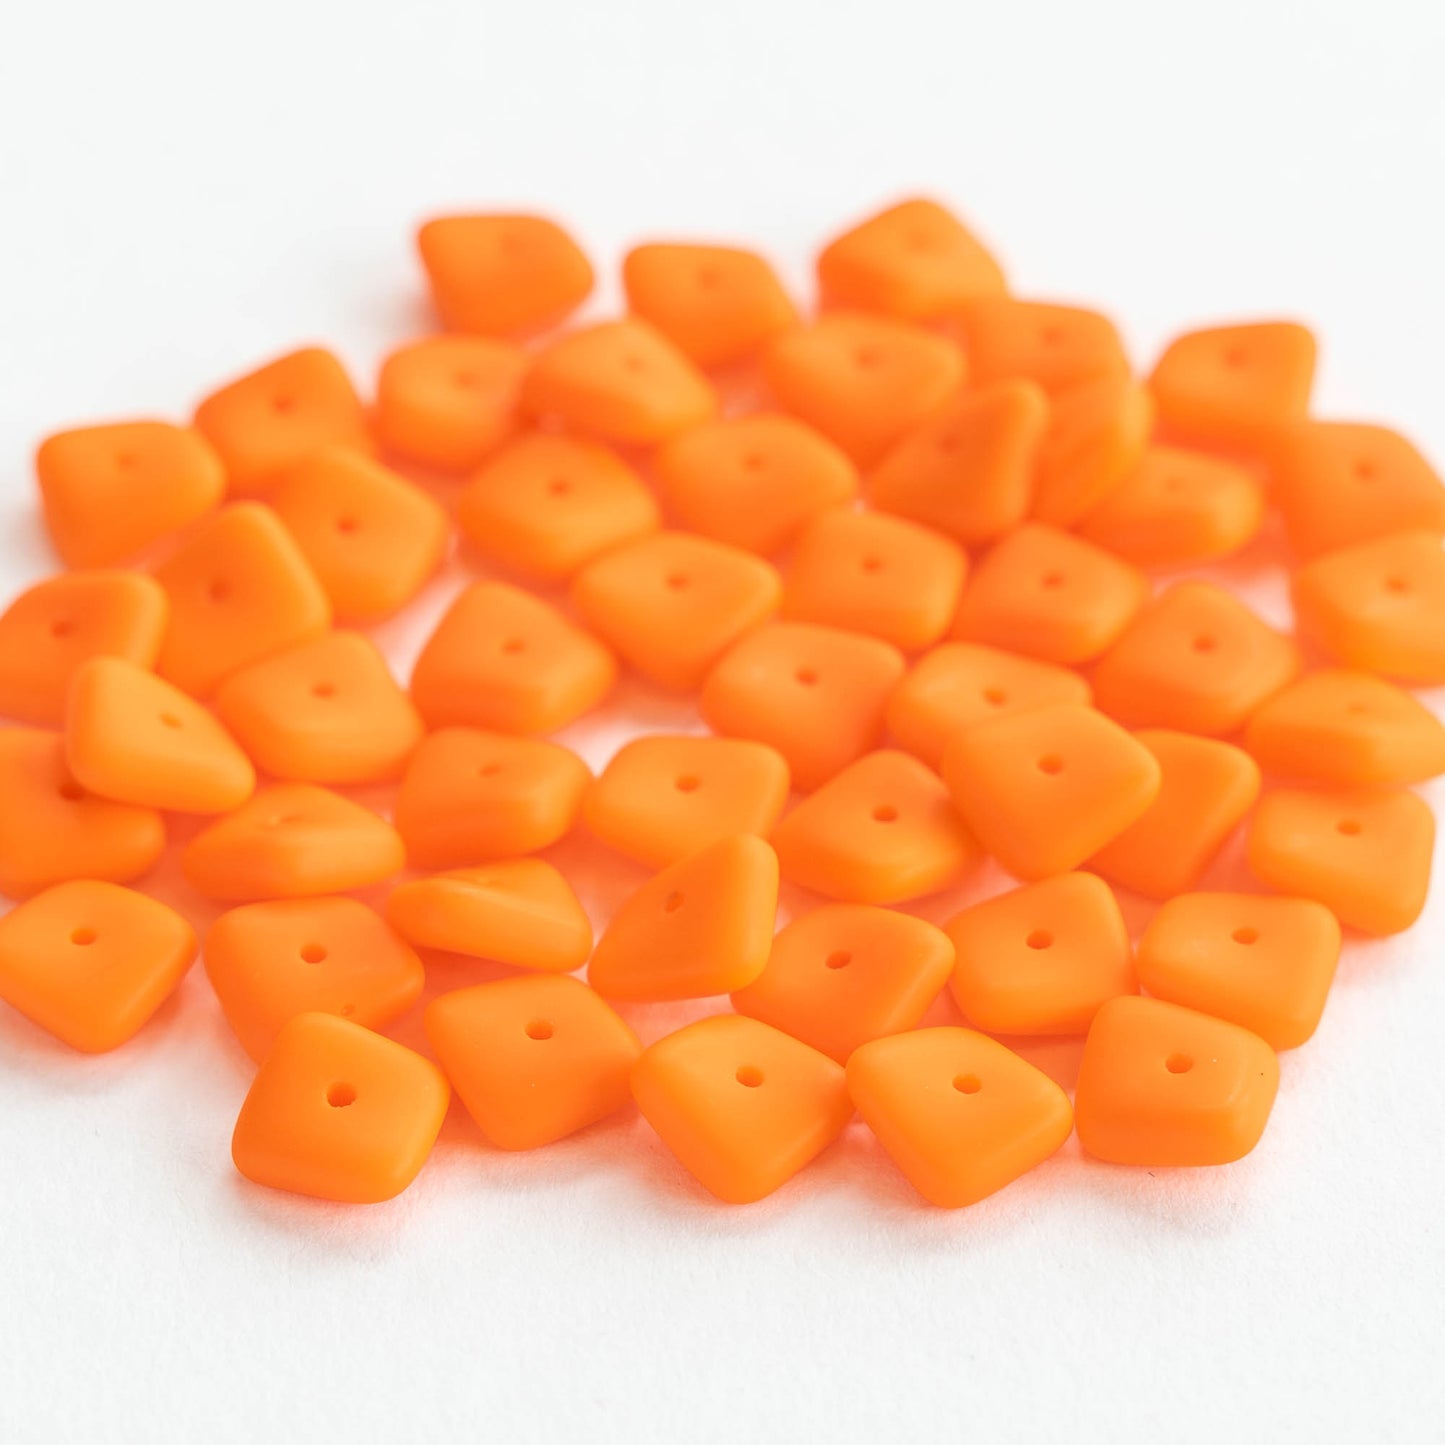 Load image into Gallery viewer, Wavy Tile Bead - Opaque Orange - 50 Beads
